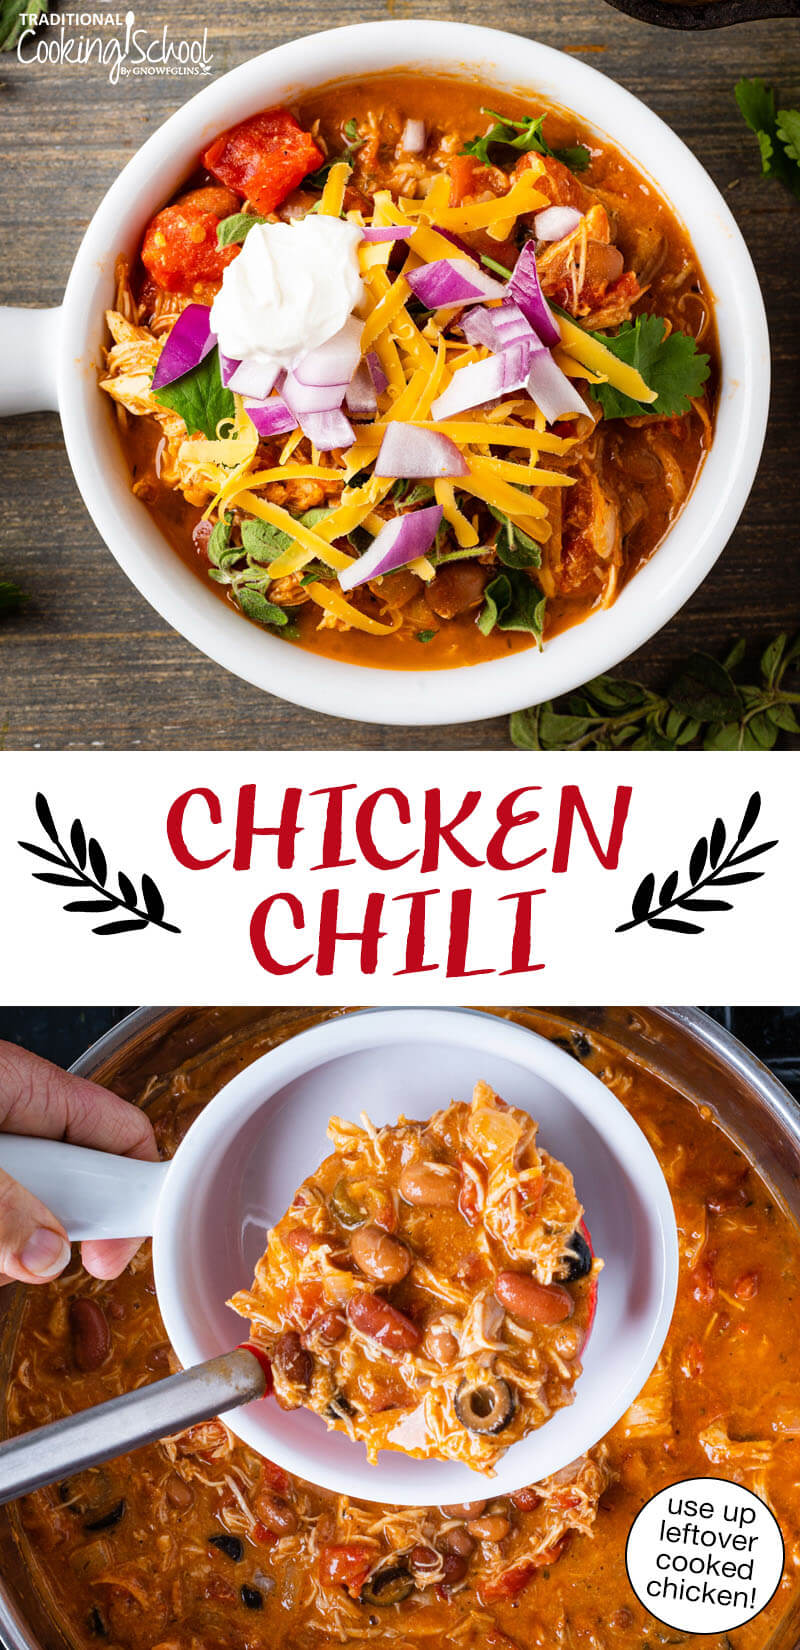 Photo collage of ladling chicken chili into a bowl, and a bowl of chili topped with sour cream, red onion, cilantro, and grated cheddar cheese. Text overlay says: "Chicken Chili (use up leftover cooked chicken!)"